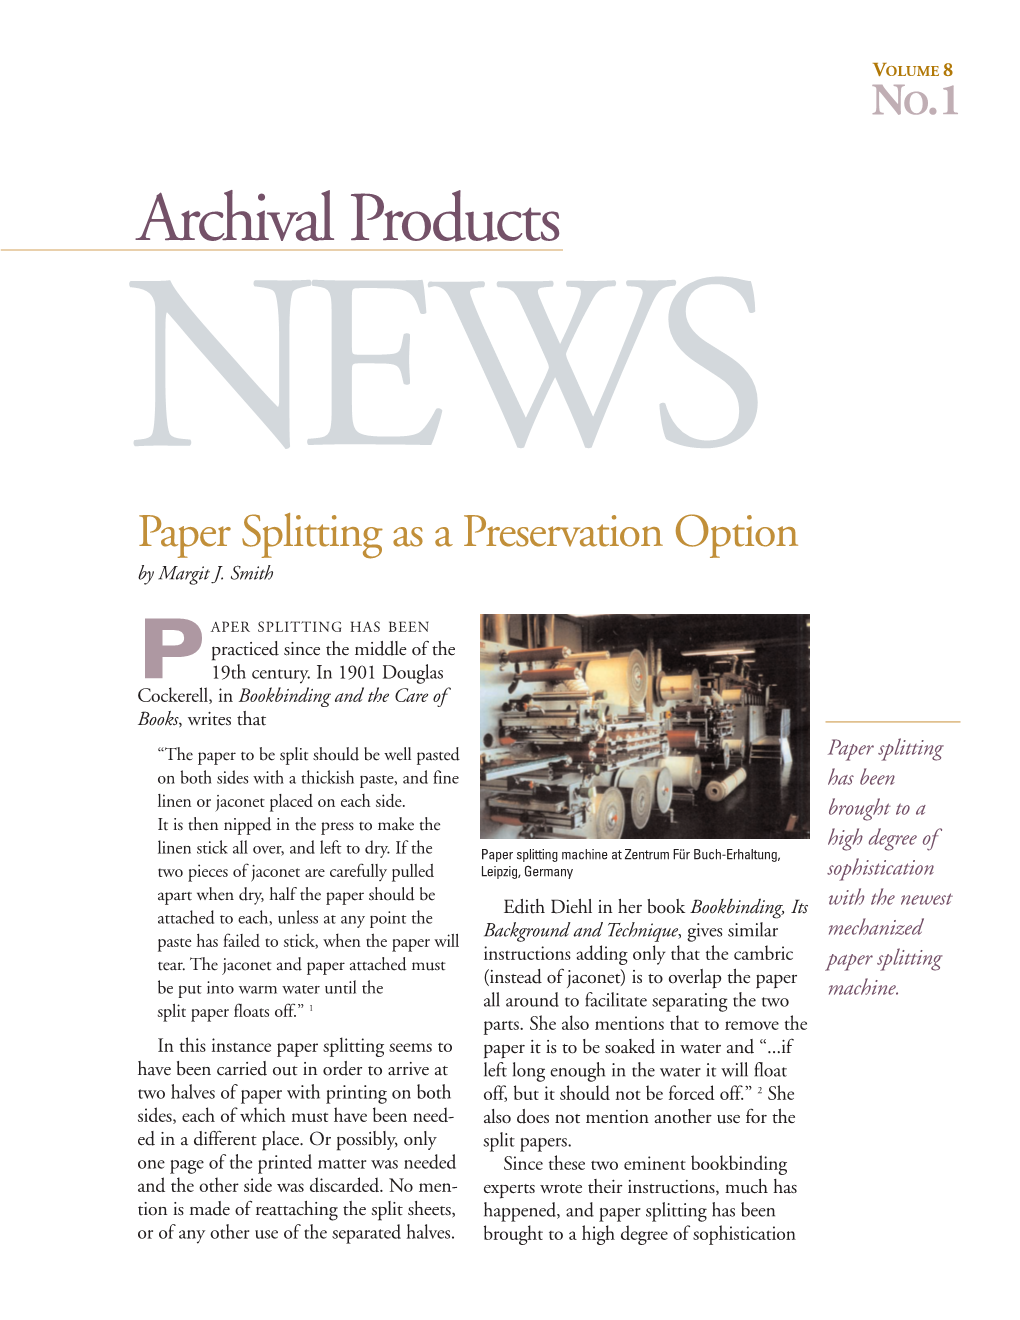 Archival Products NEWS Volume 8, No. 1